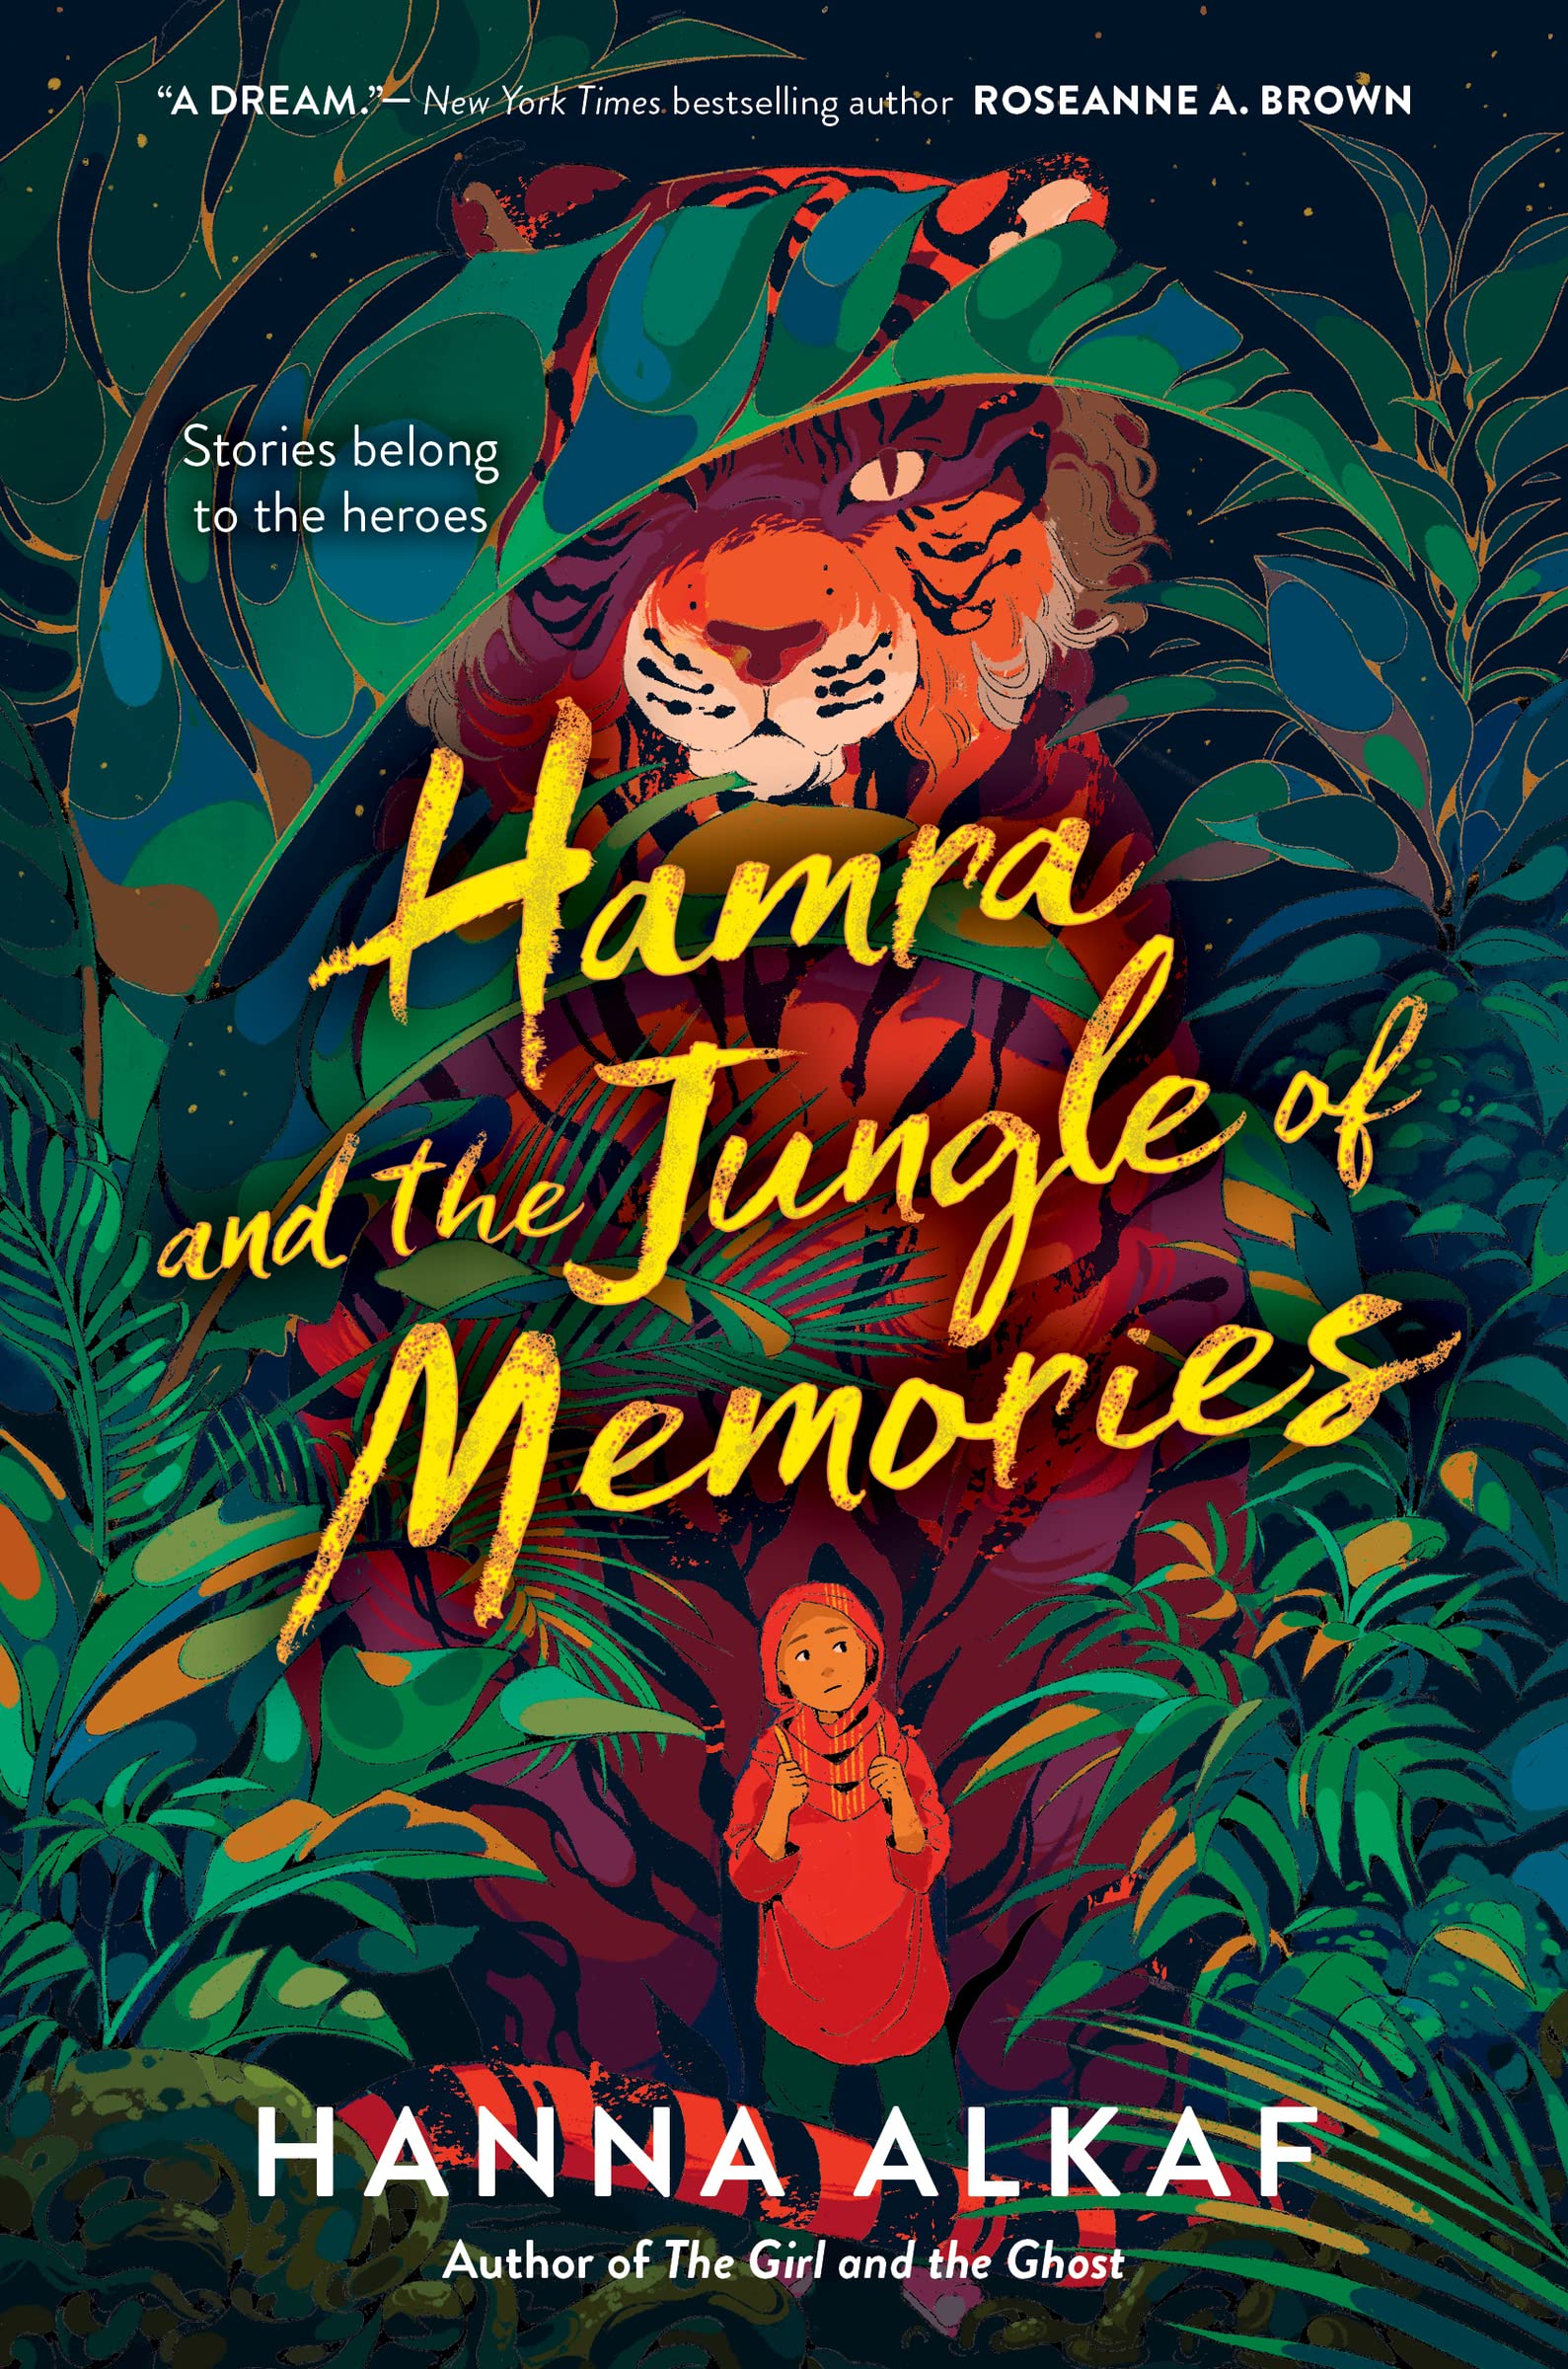 Hamar and the Jungle of Memories—25 Best New Books for 7th Graders